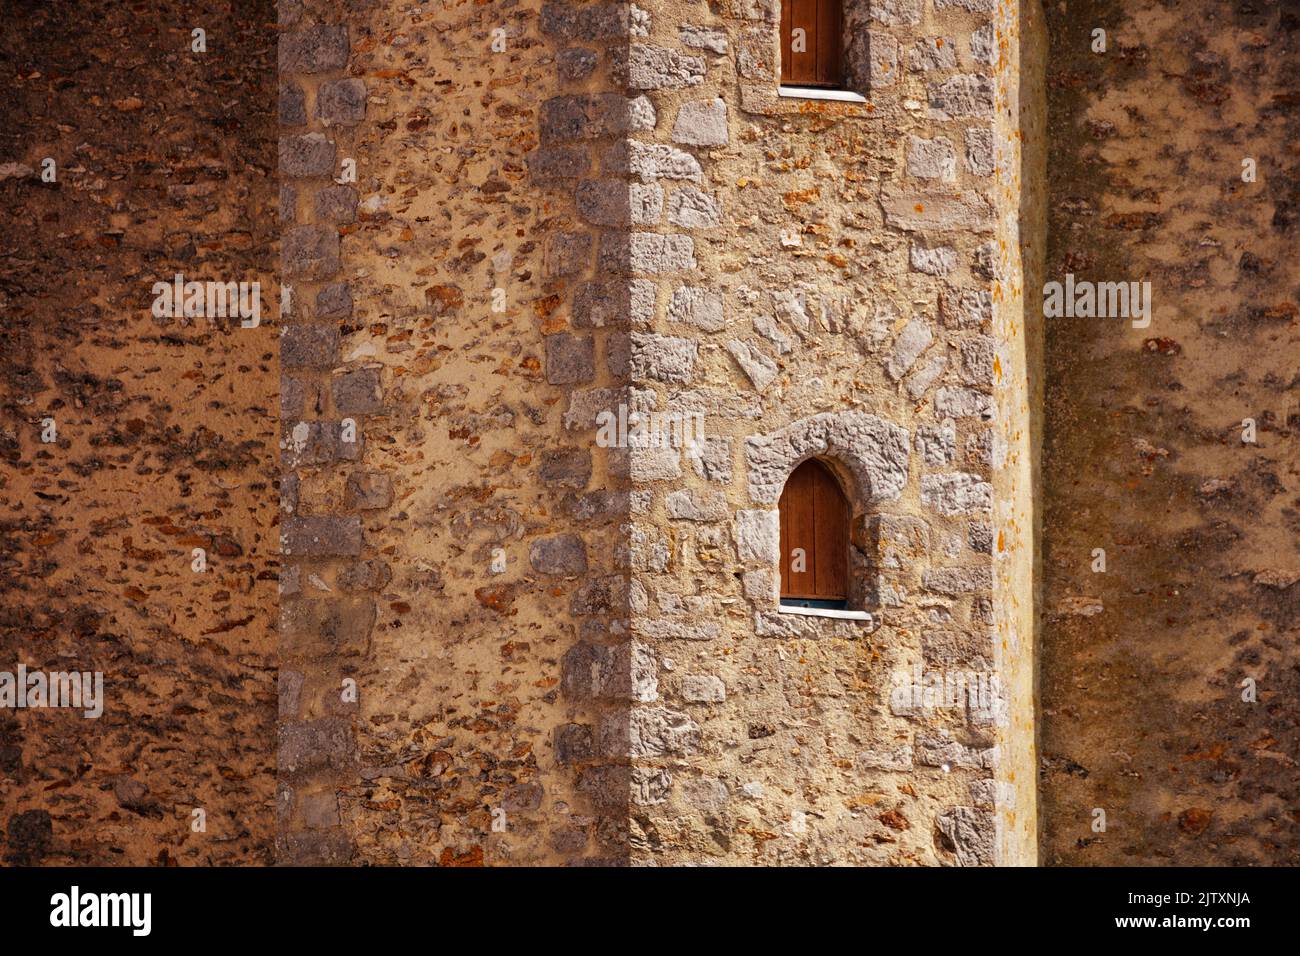 Close-up of loophole window in medieval stronghold castle tower Stock Photo